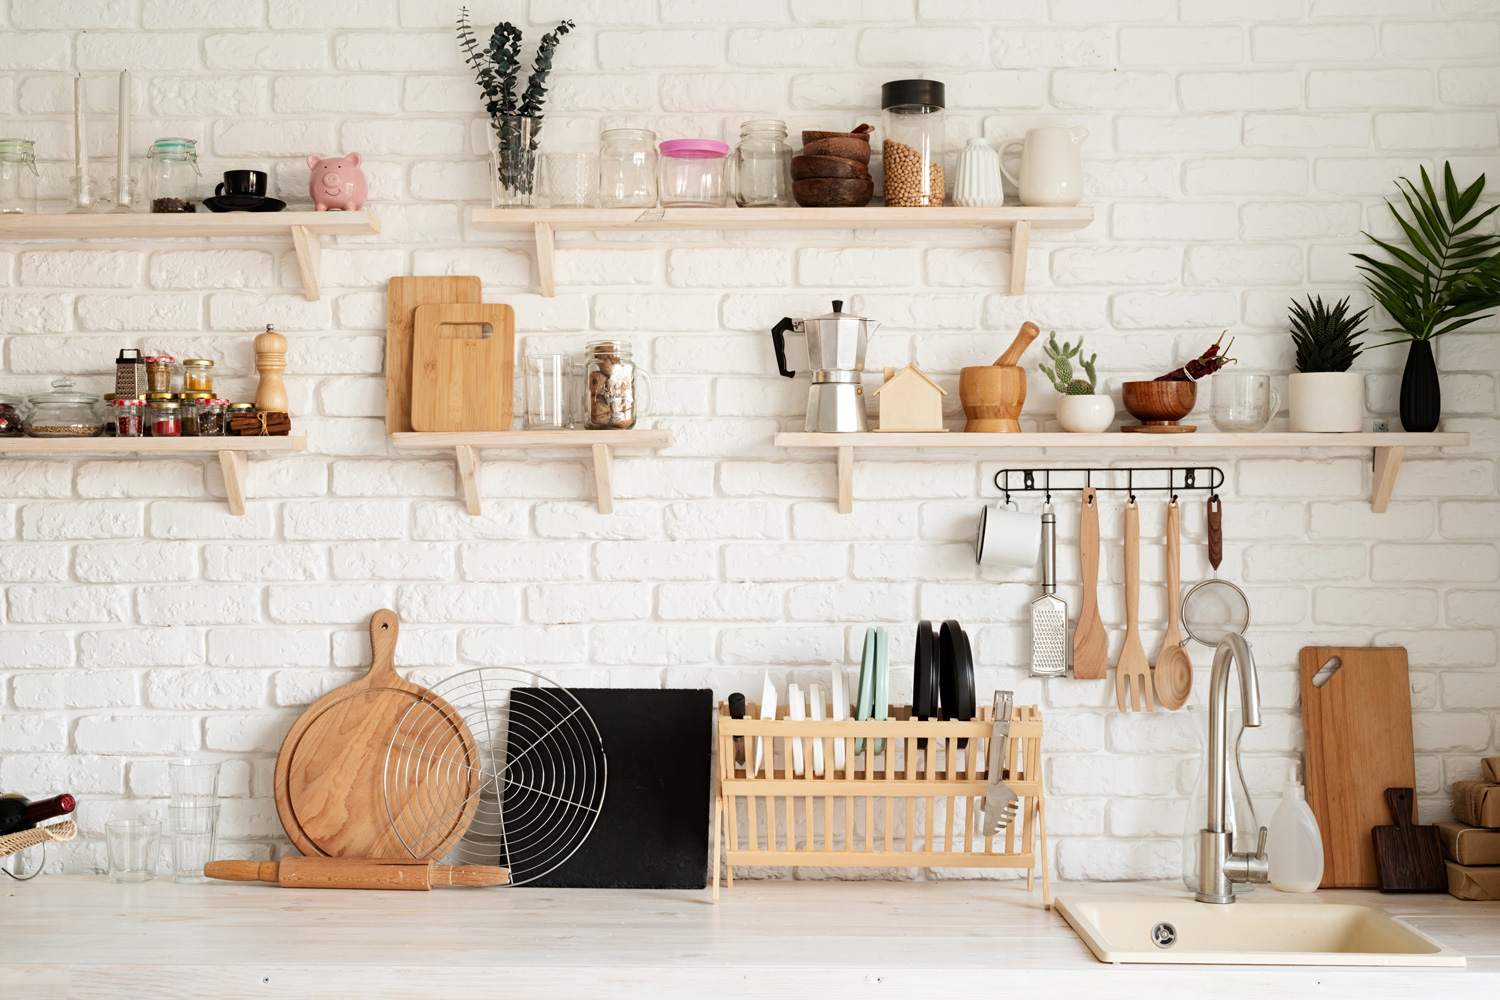 Rustic kitchen interior with brick wall and white wooden shelves, front view